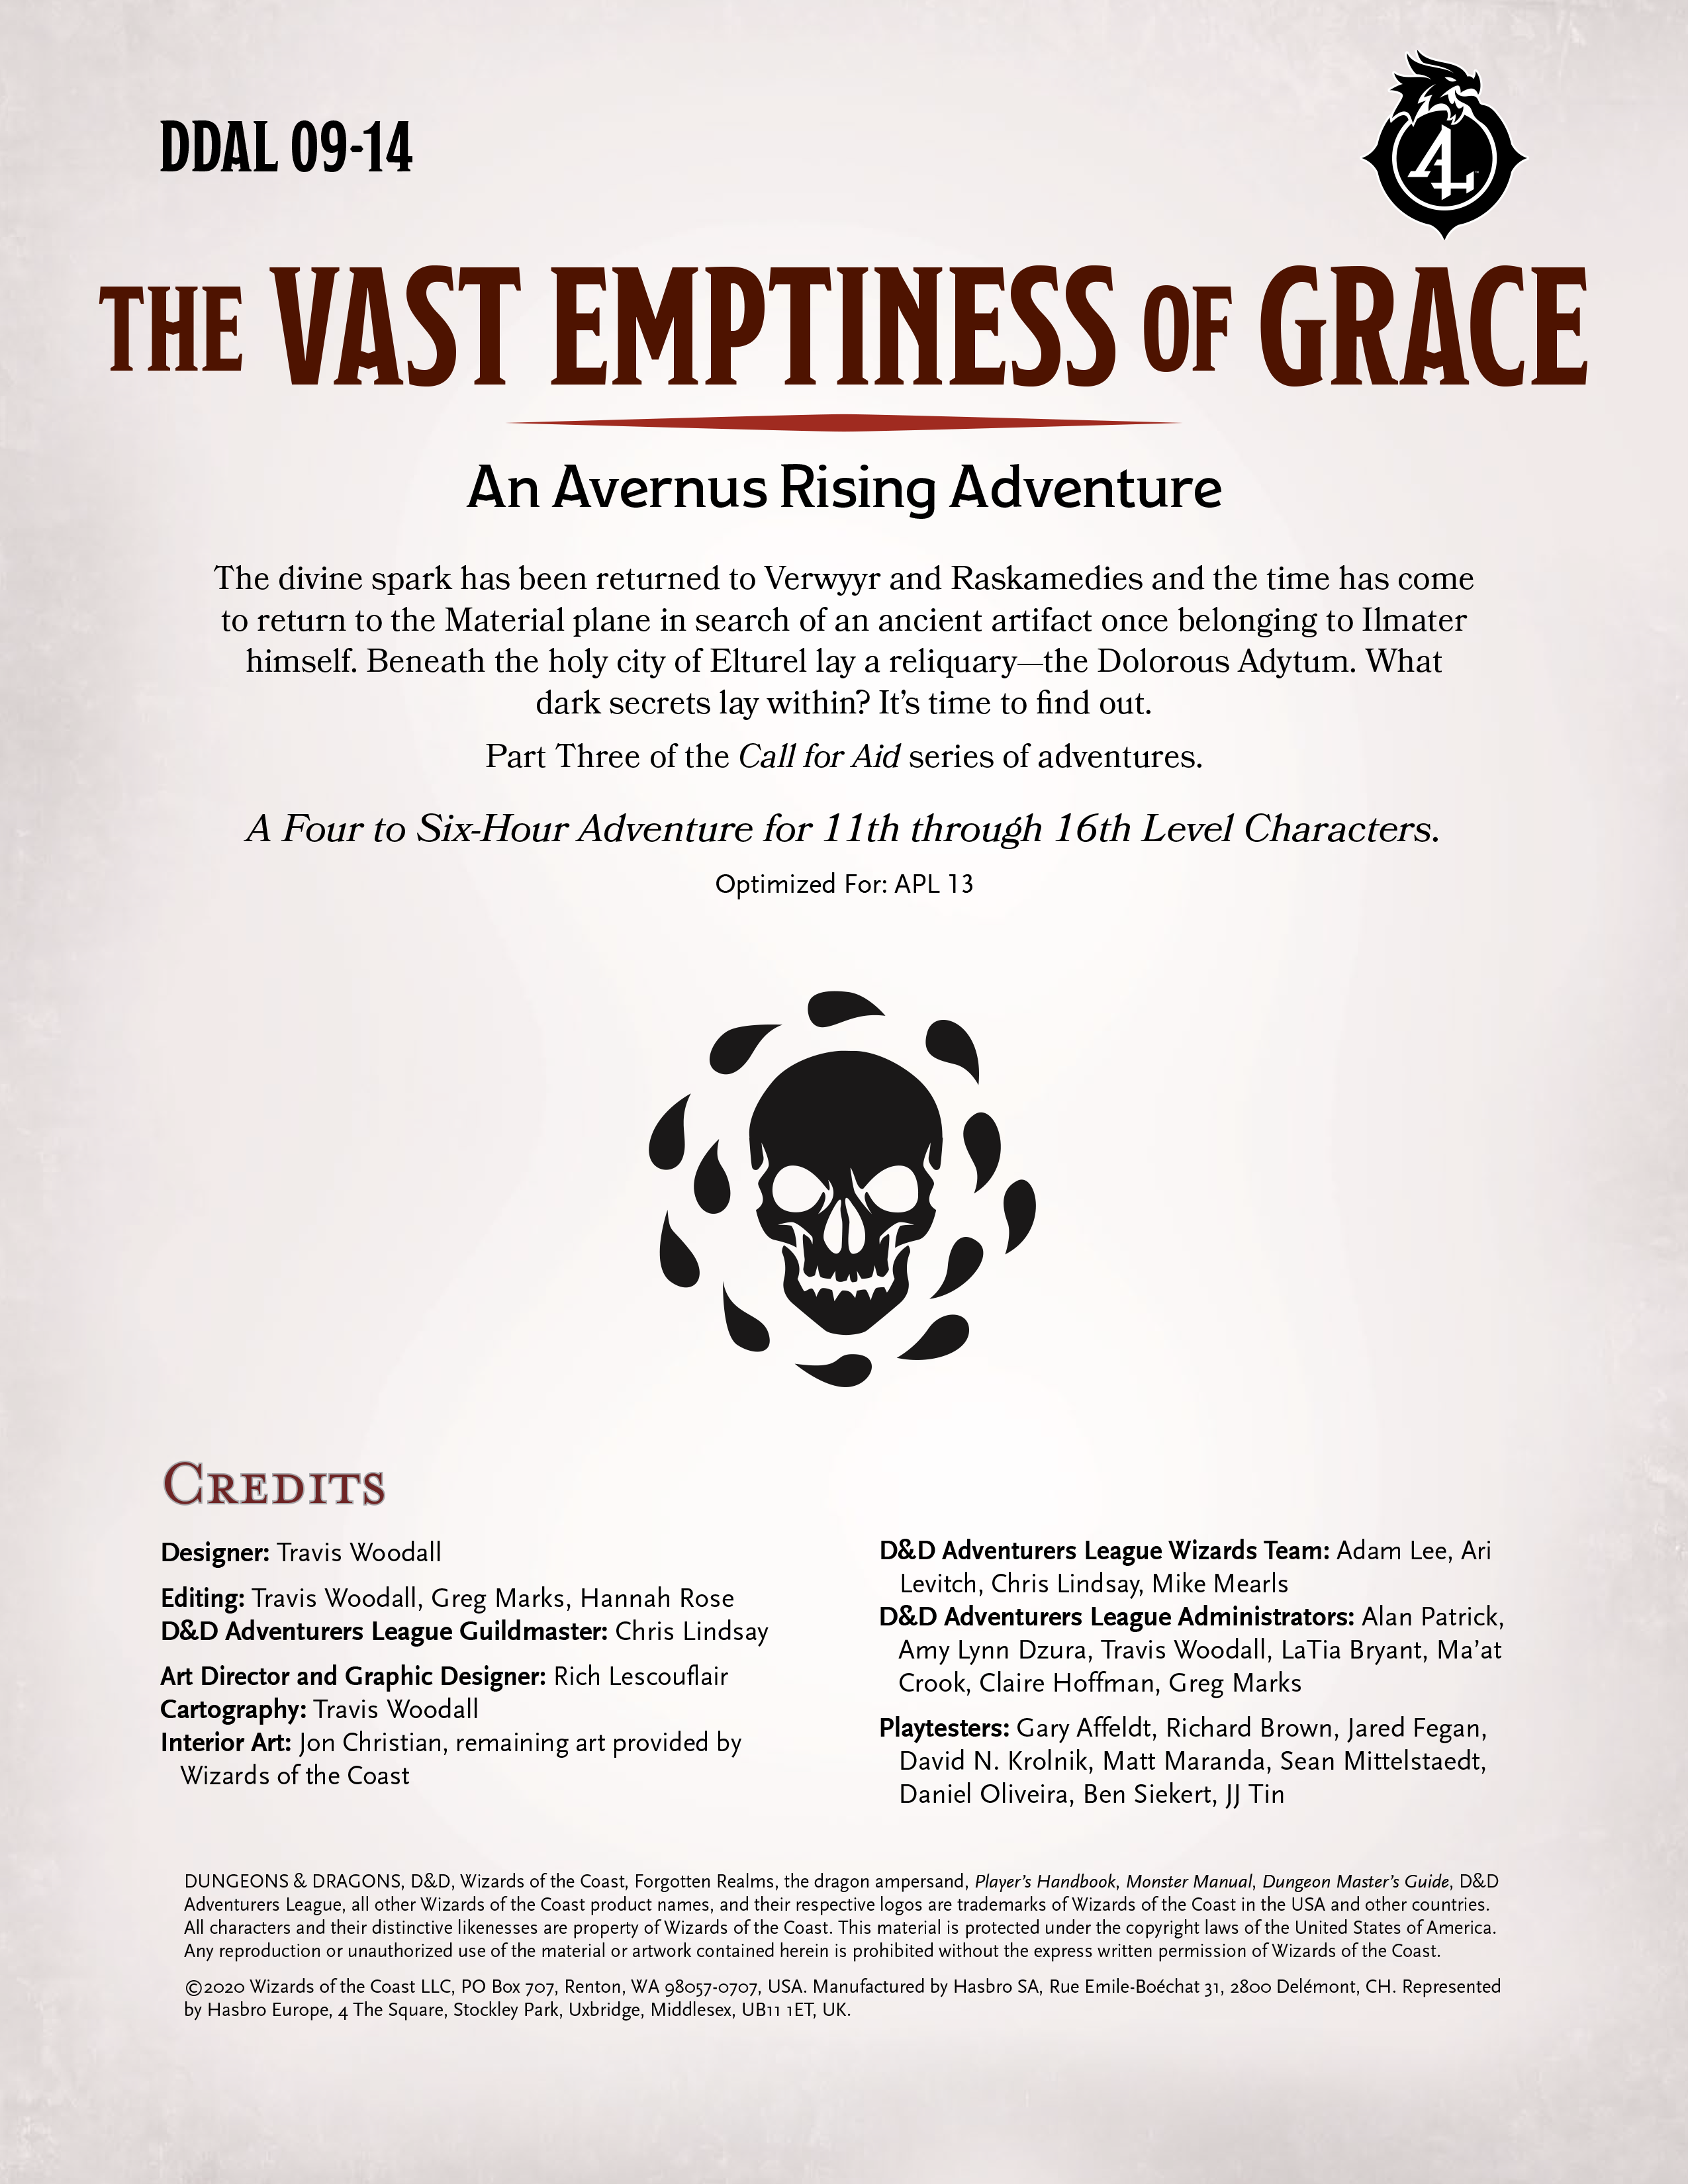 The Vast Emptiness of Grace